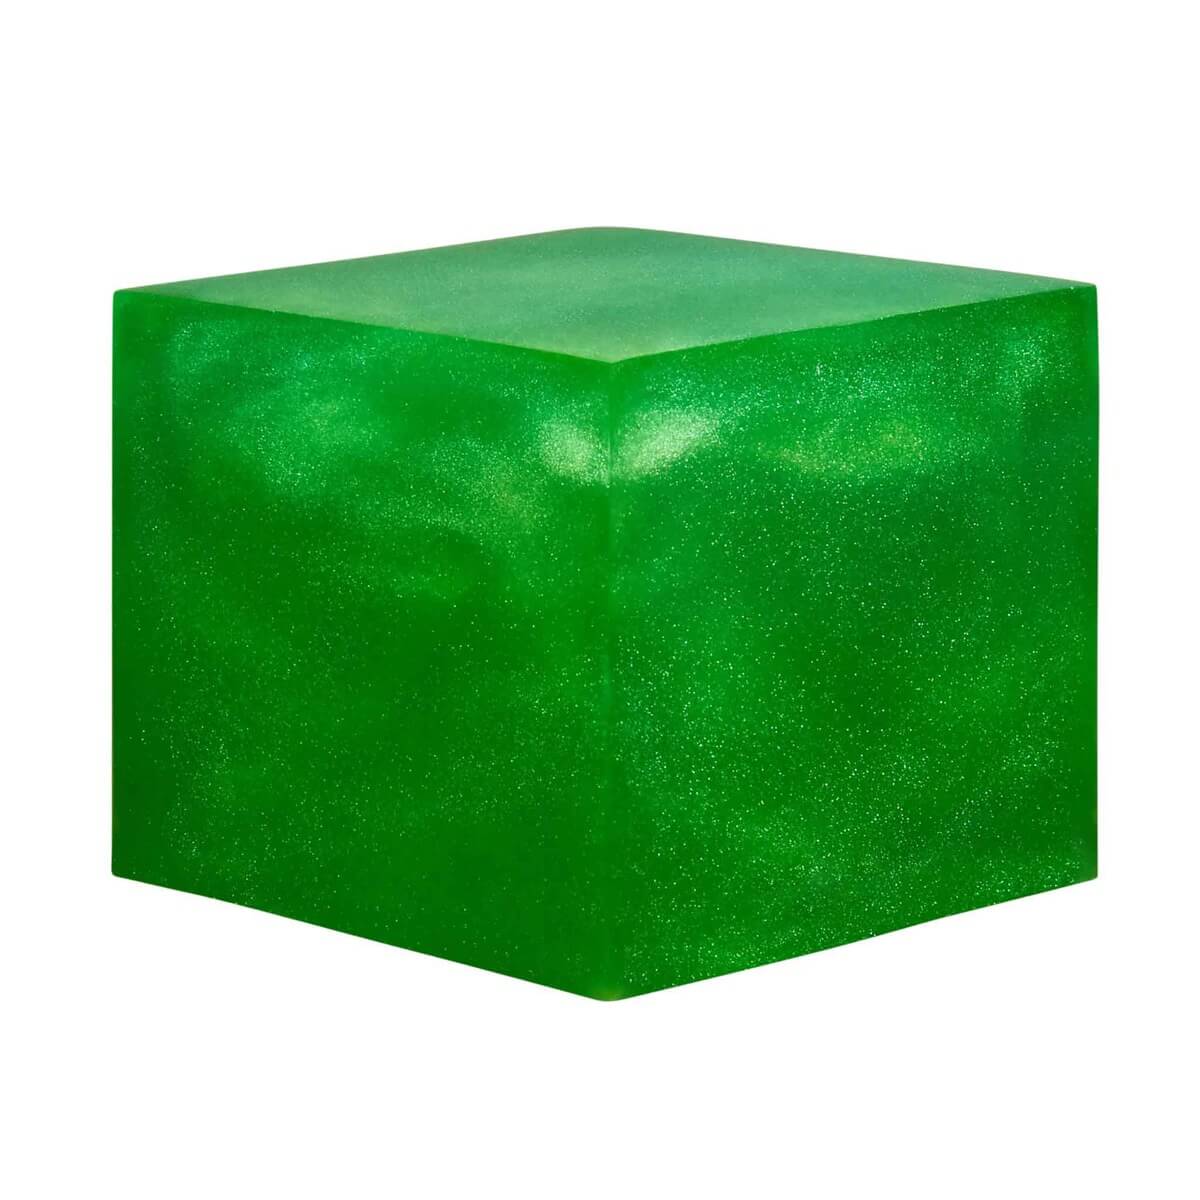 A resin cube made with the Emerald Green Mica Powder Pigment by Pigmently.